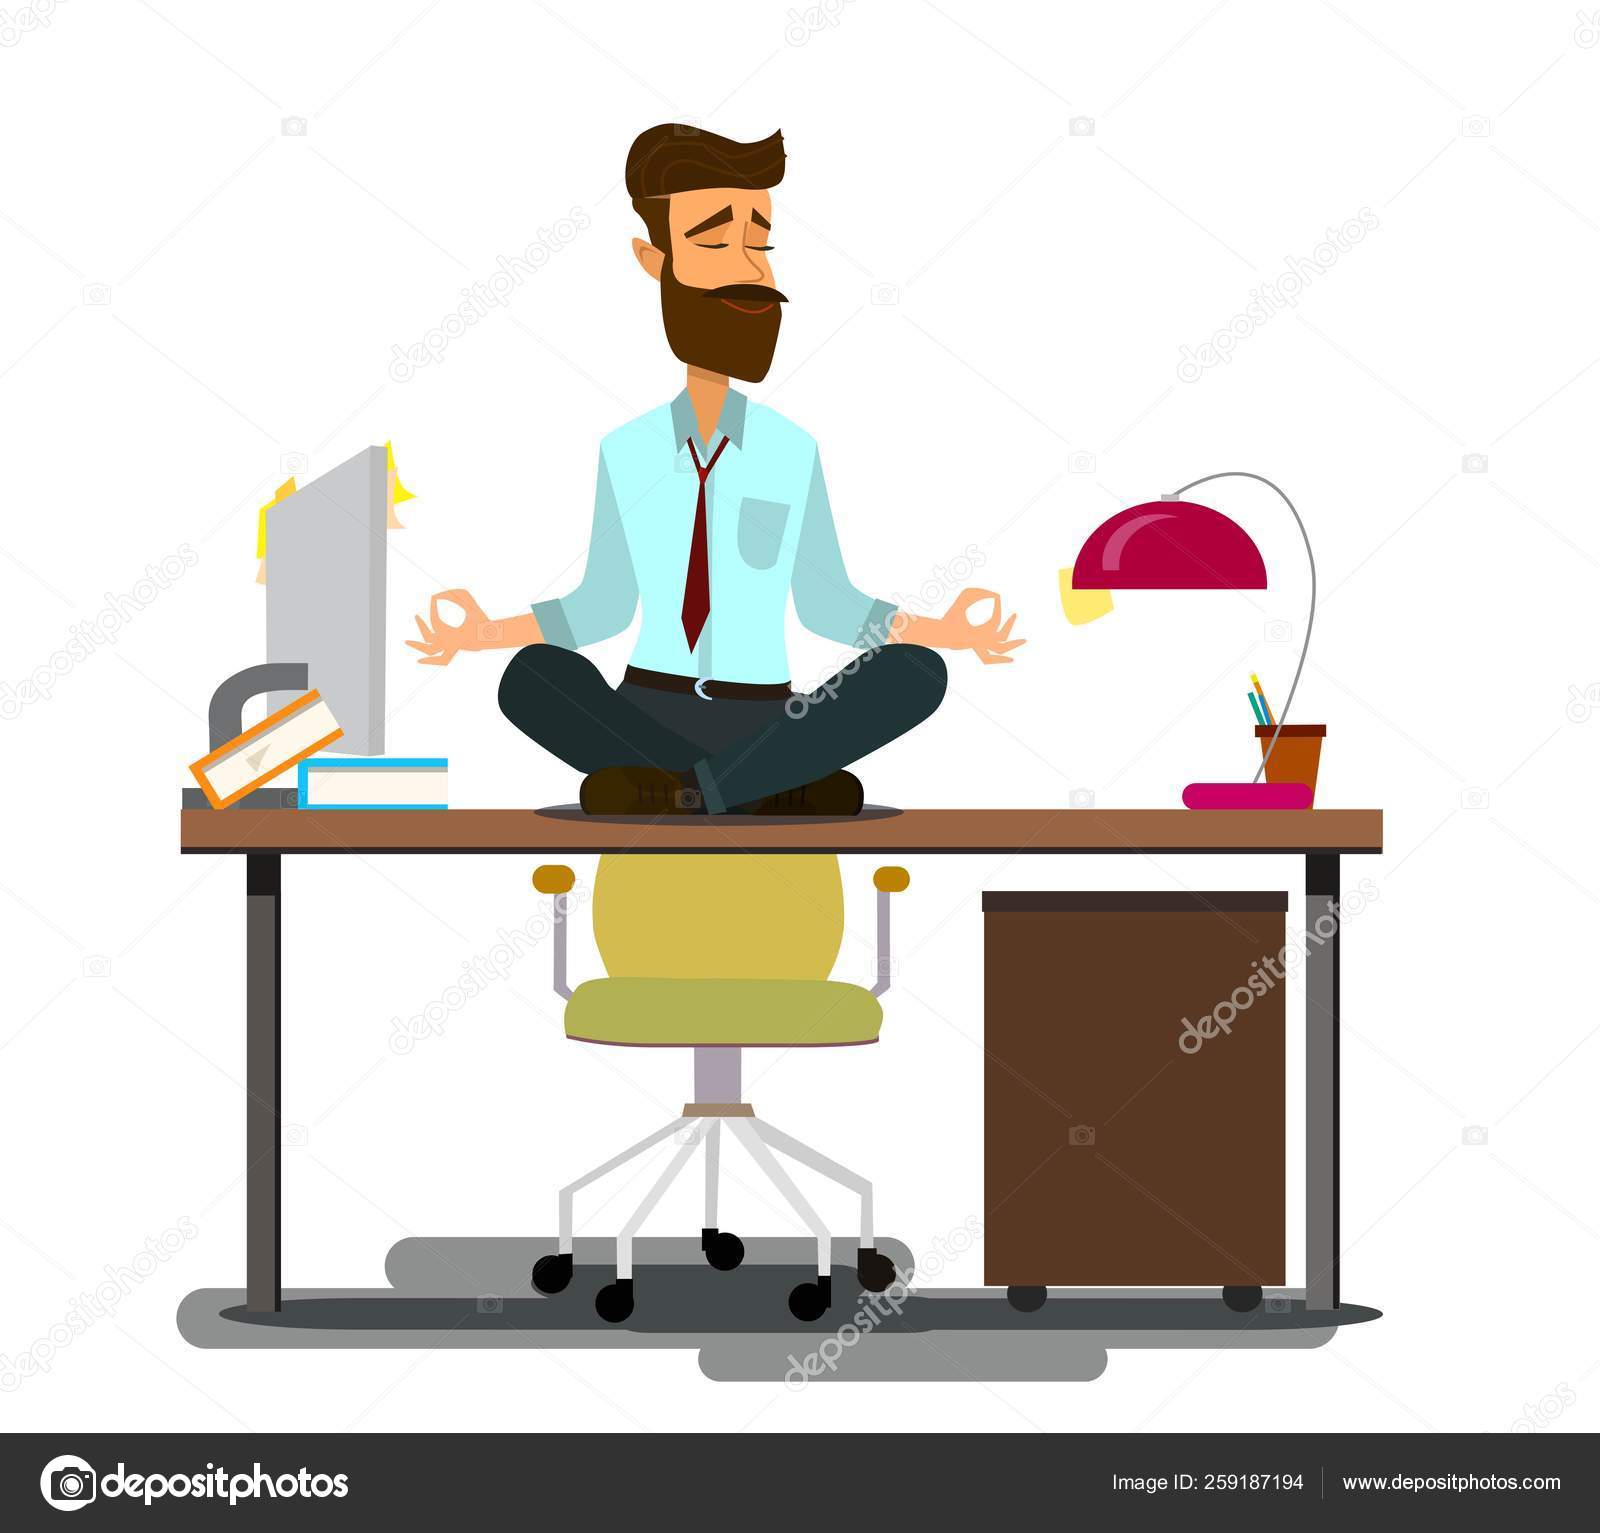 Relaxing And Stress Relief At Workplace Cartoon Vector Concept